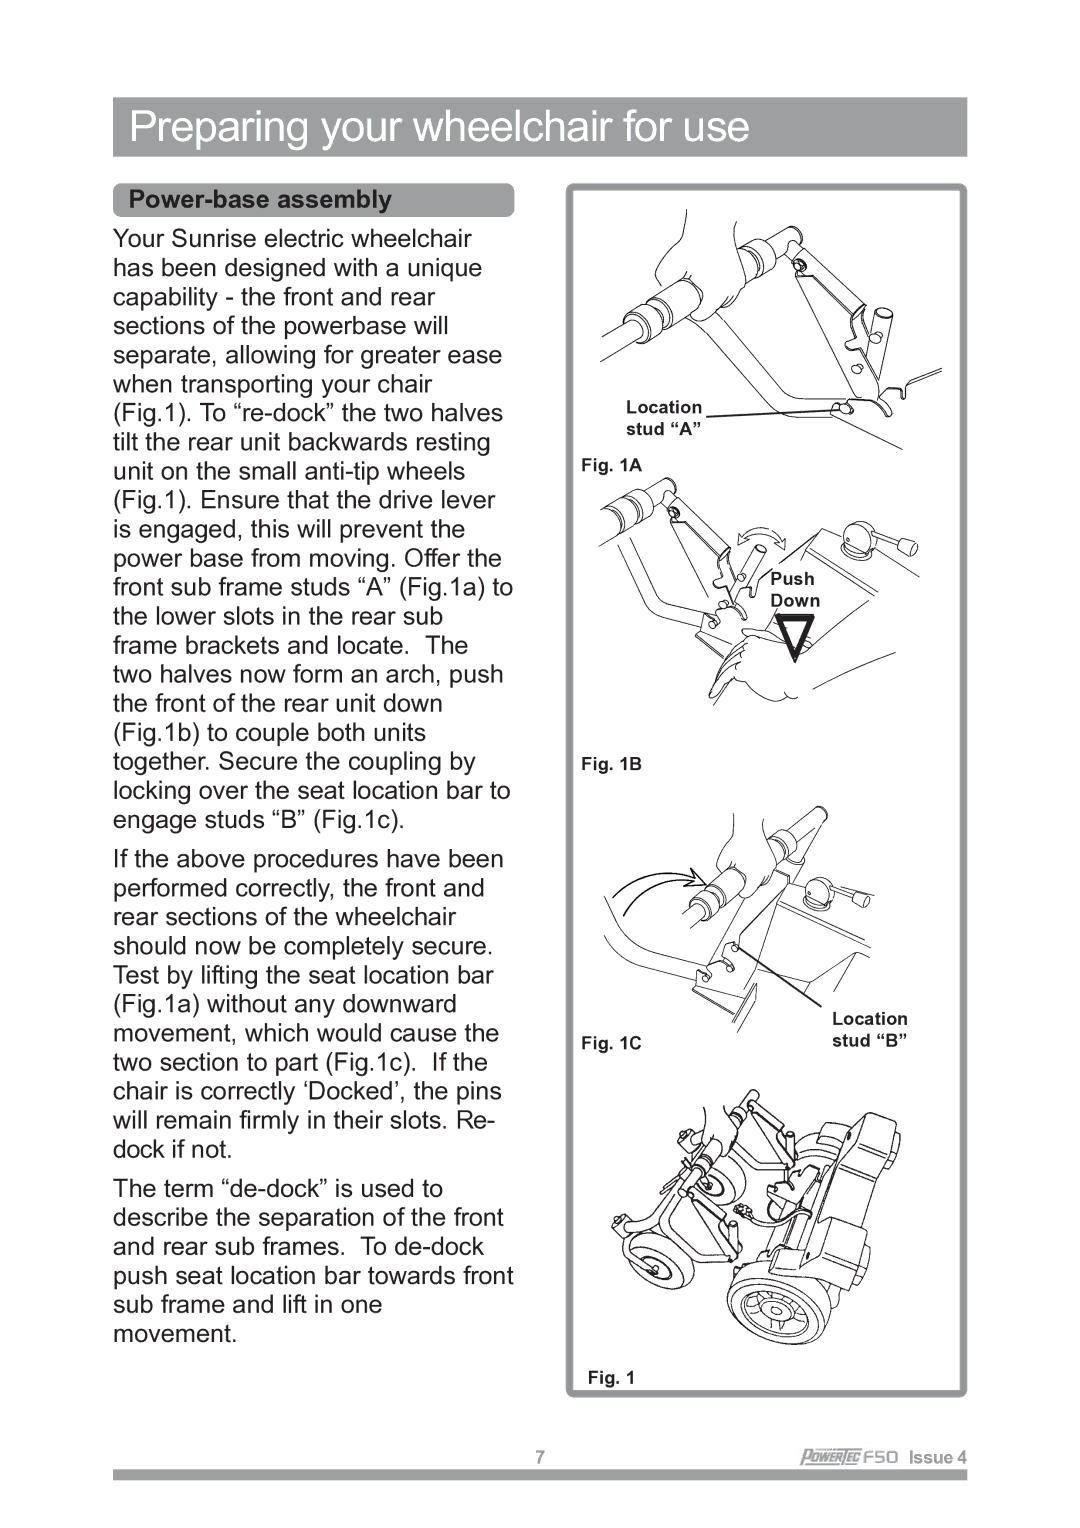 Sunrise Medical F50 owner manual Preparing your wheelchair for use, Power-base assembly 